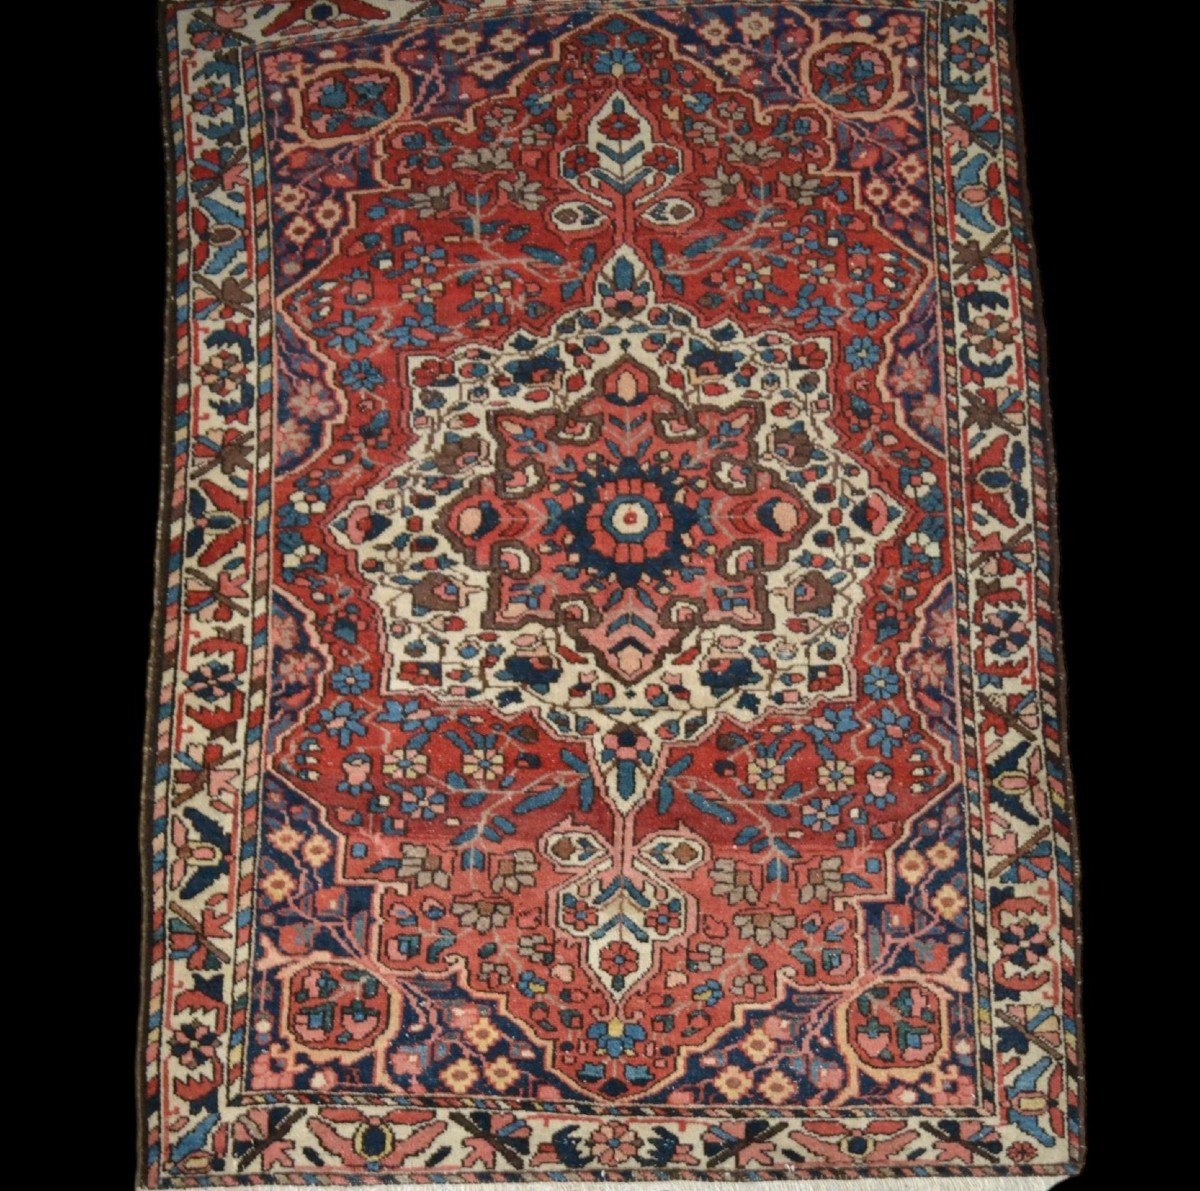 Antique Bakhtiar Rug, 137 X 194 Cm, Hand-knotted Wool In Iran, First Part Of The 20th Century